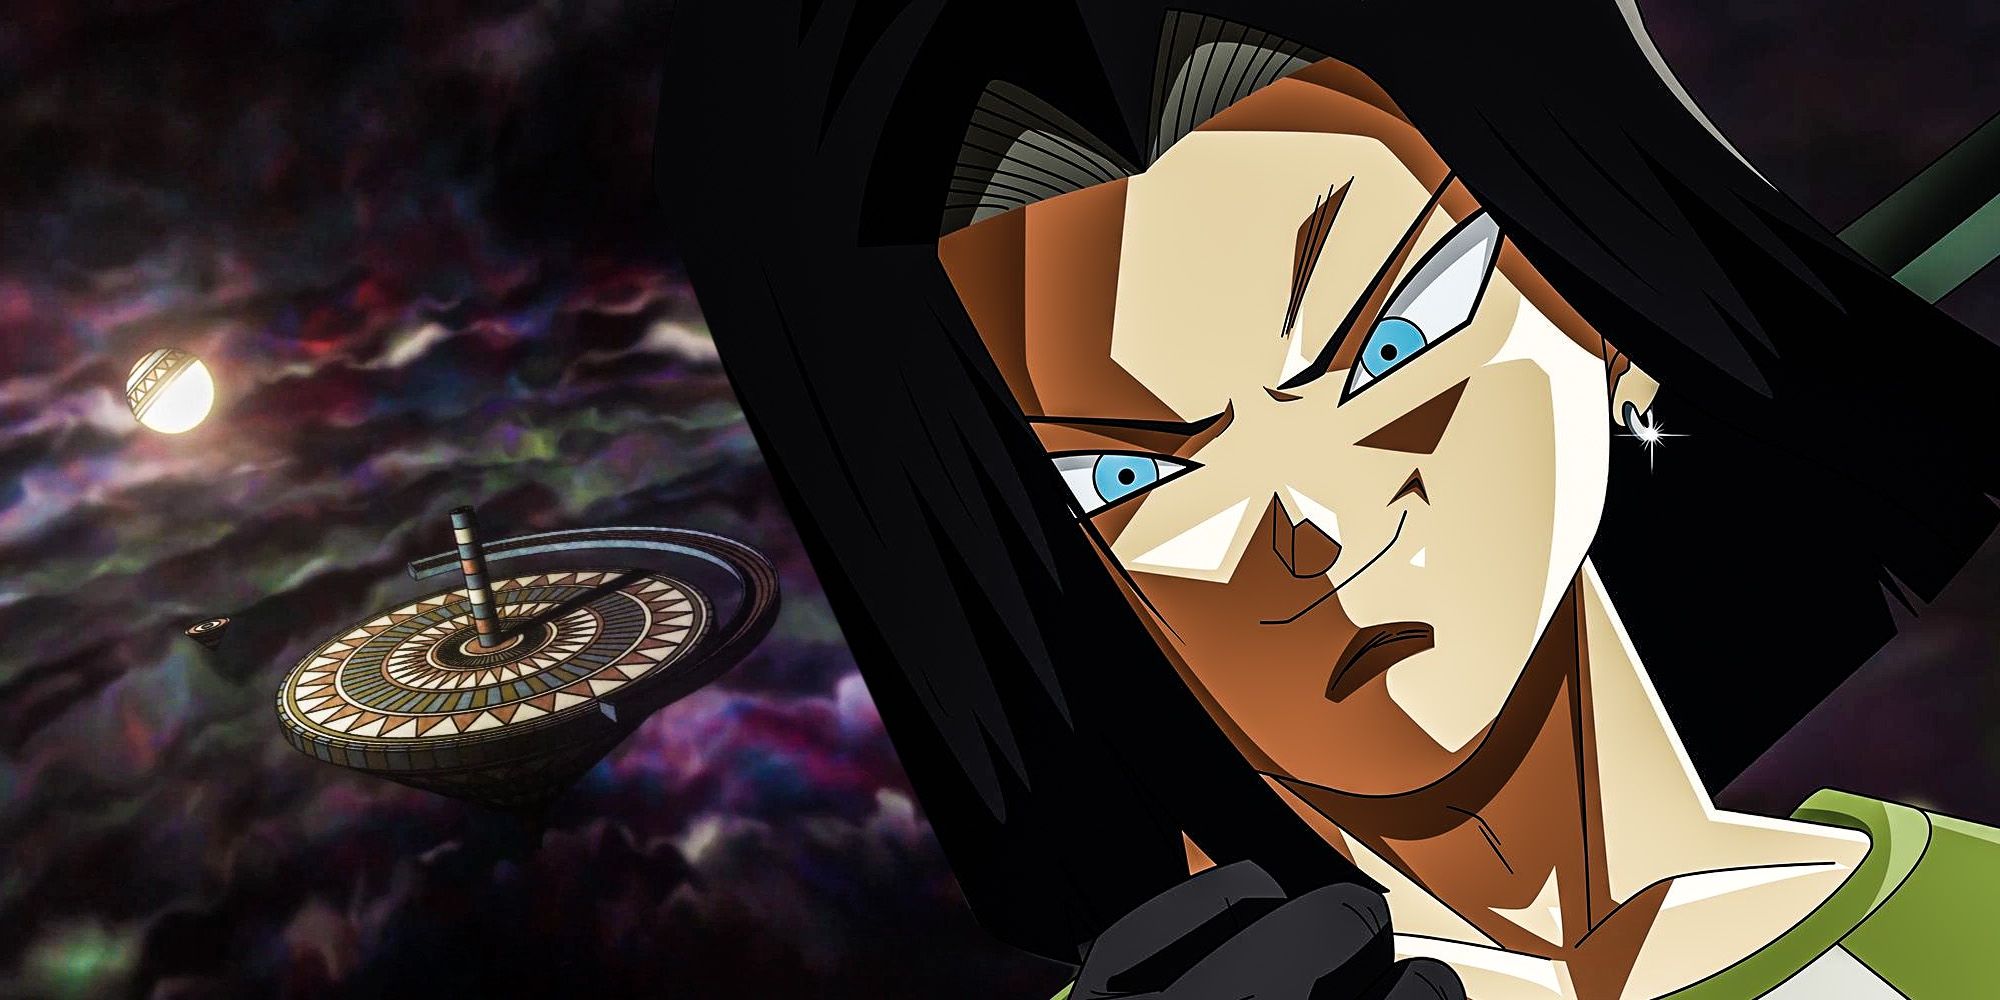 Dragon ball z Android 17 tournament of power last fighter